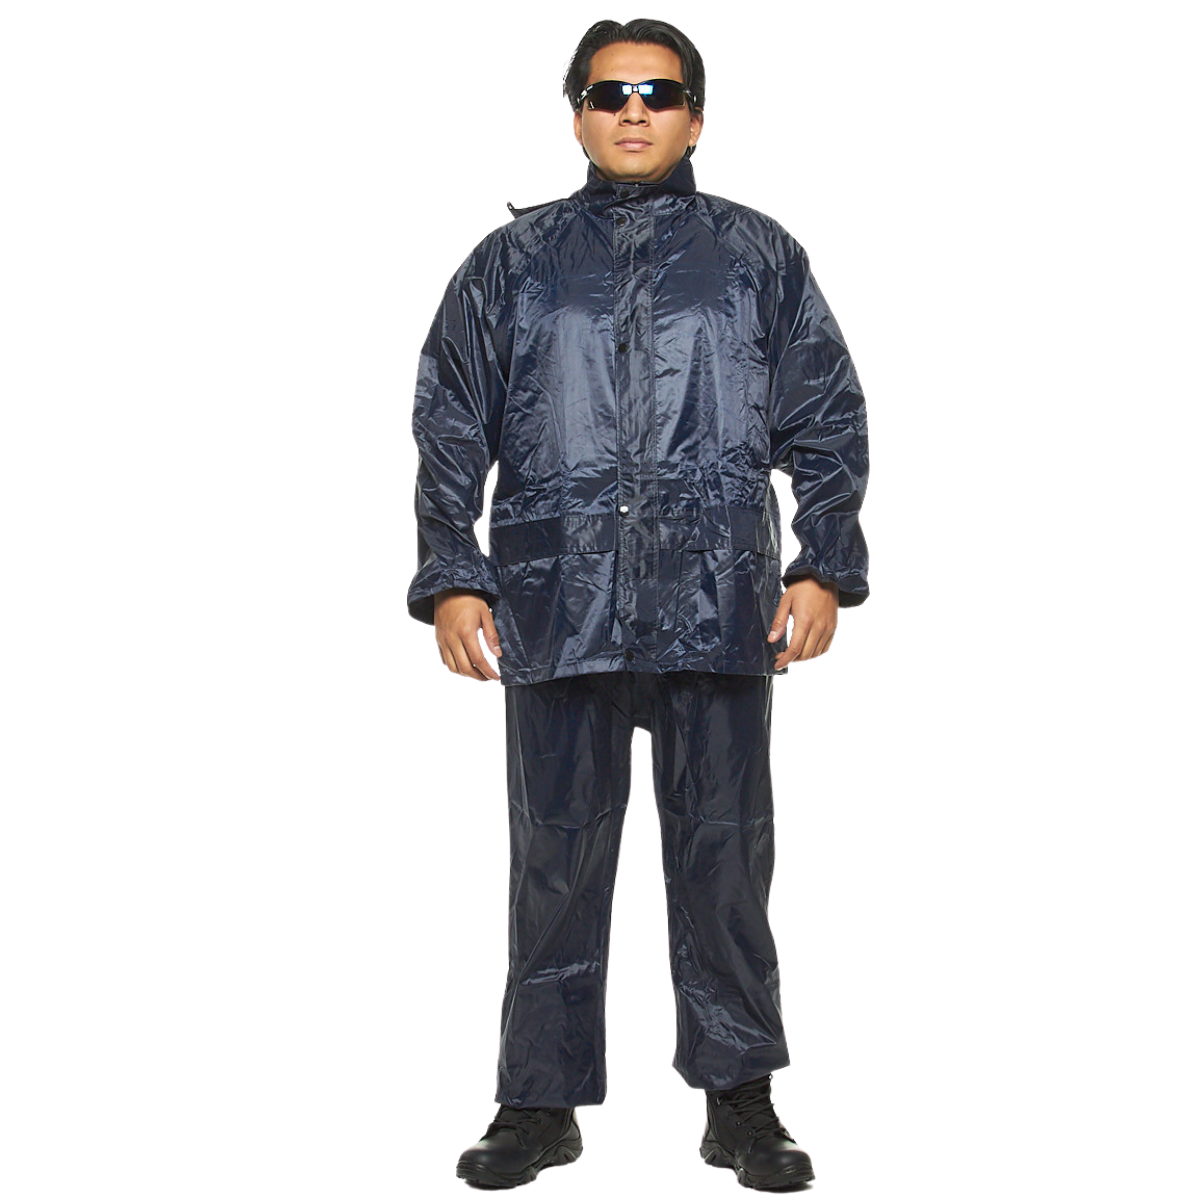 Poncho Lluvia Hombre Impermeable 2 Piezas Tactical Police